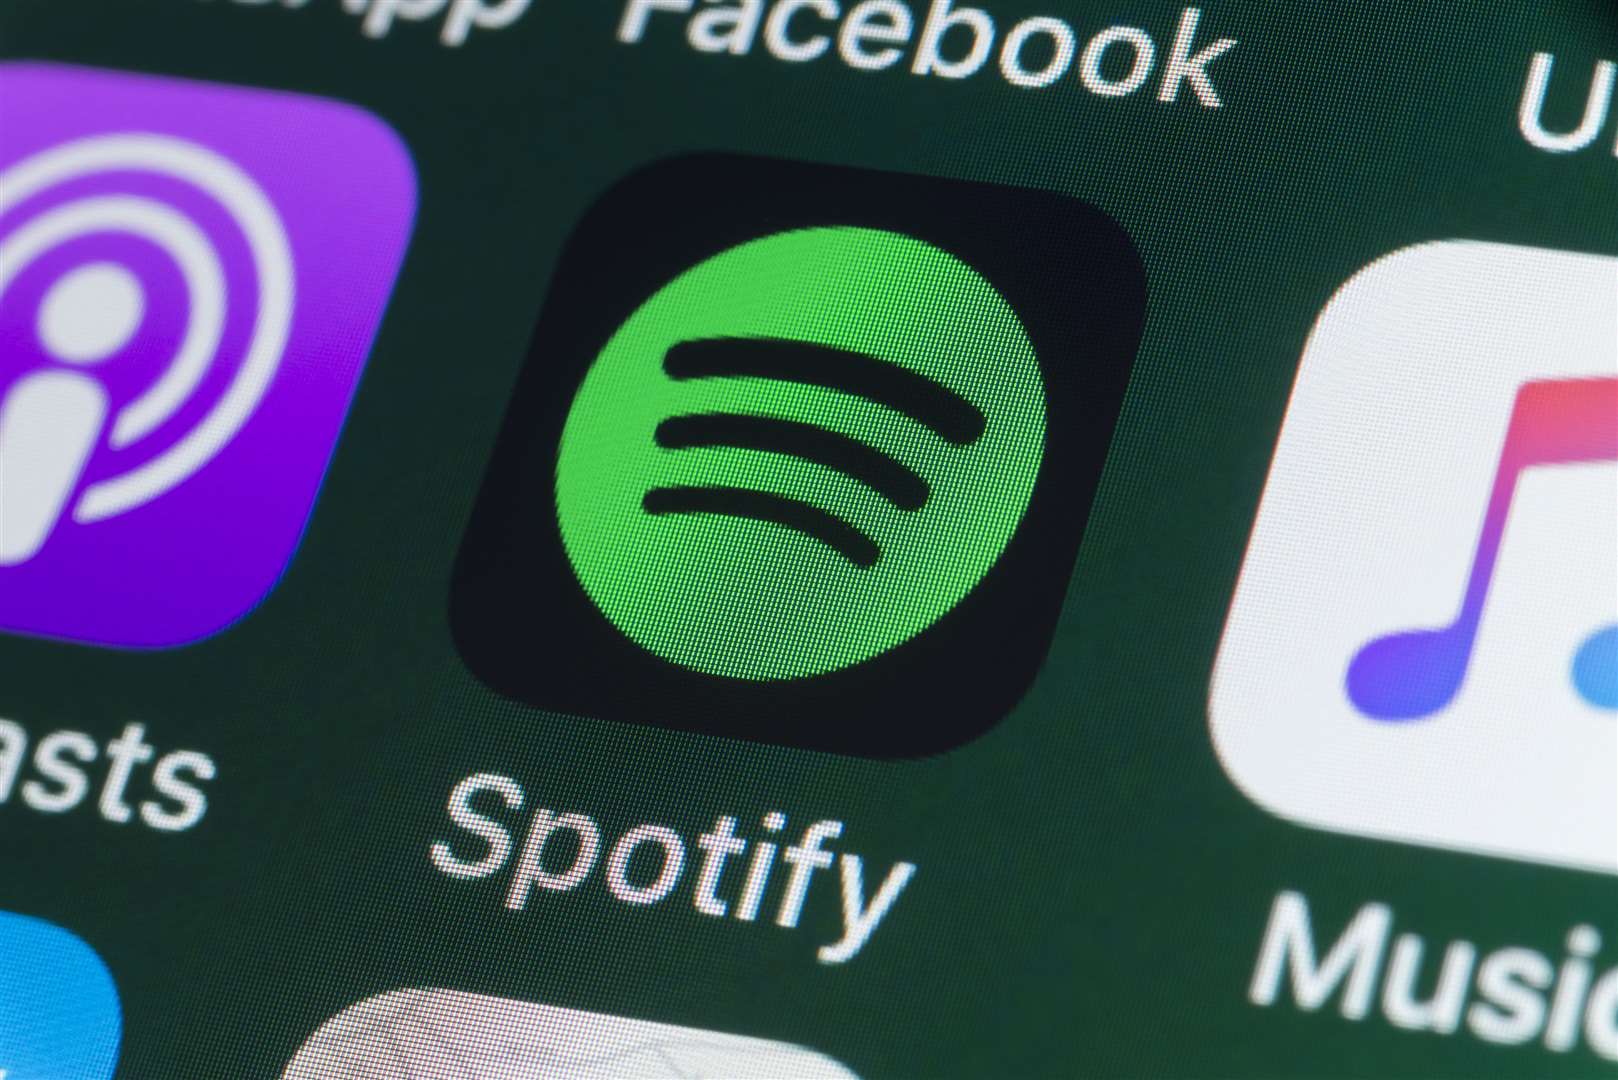 The likes of Spotify have transformed streaming in the entertainment industry